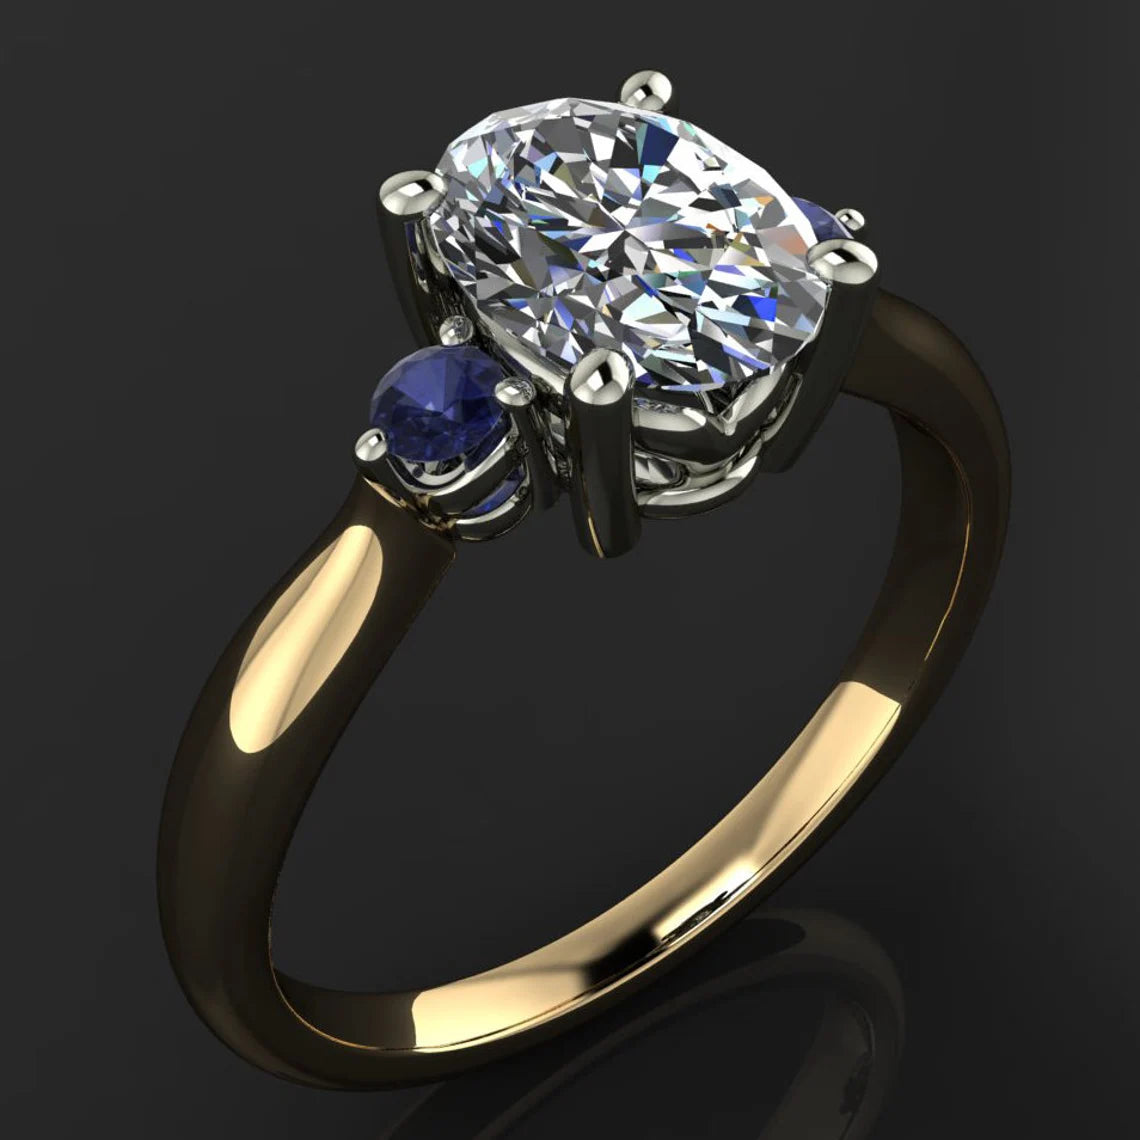 savannah ring – 1.5 carat oval NEO moissanite engagement ring, sapphire side stones - J Hollywood Designs